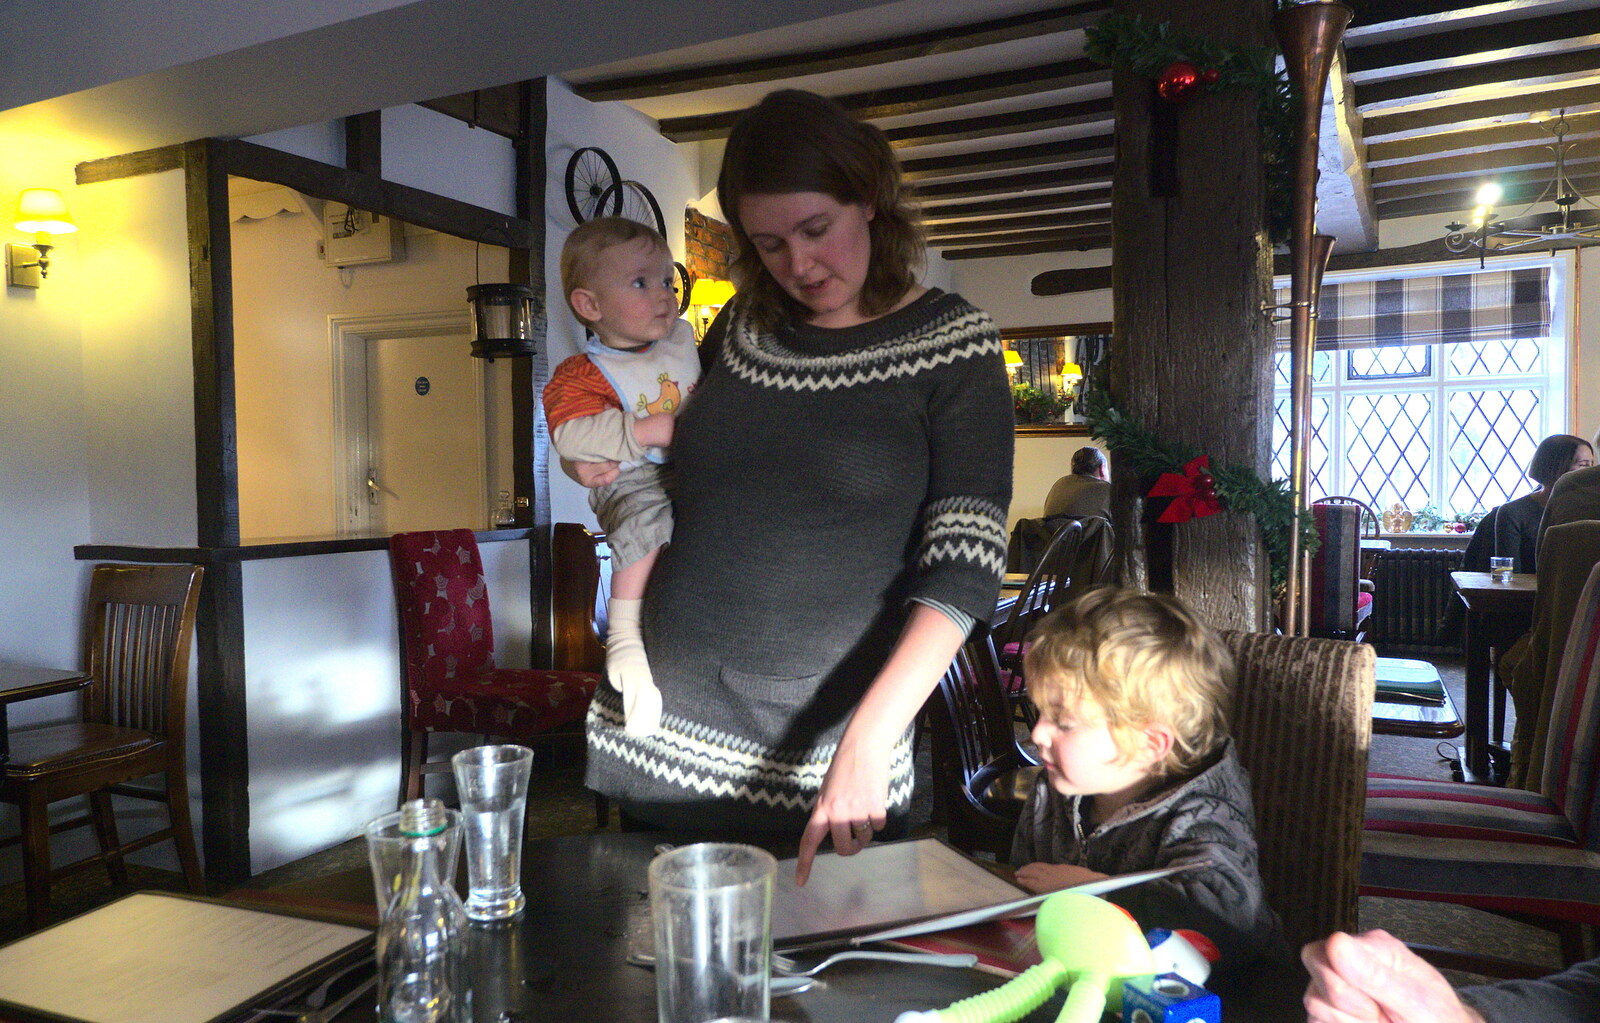 Isobel helps Fred read the menu from New Year's Day and Lunch at the White Horse, Ipswich, Finningham and Brome - 1st January 2013